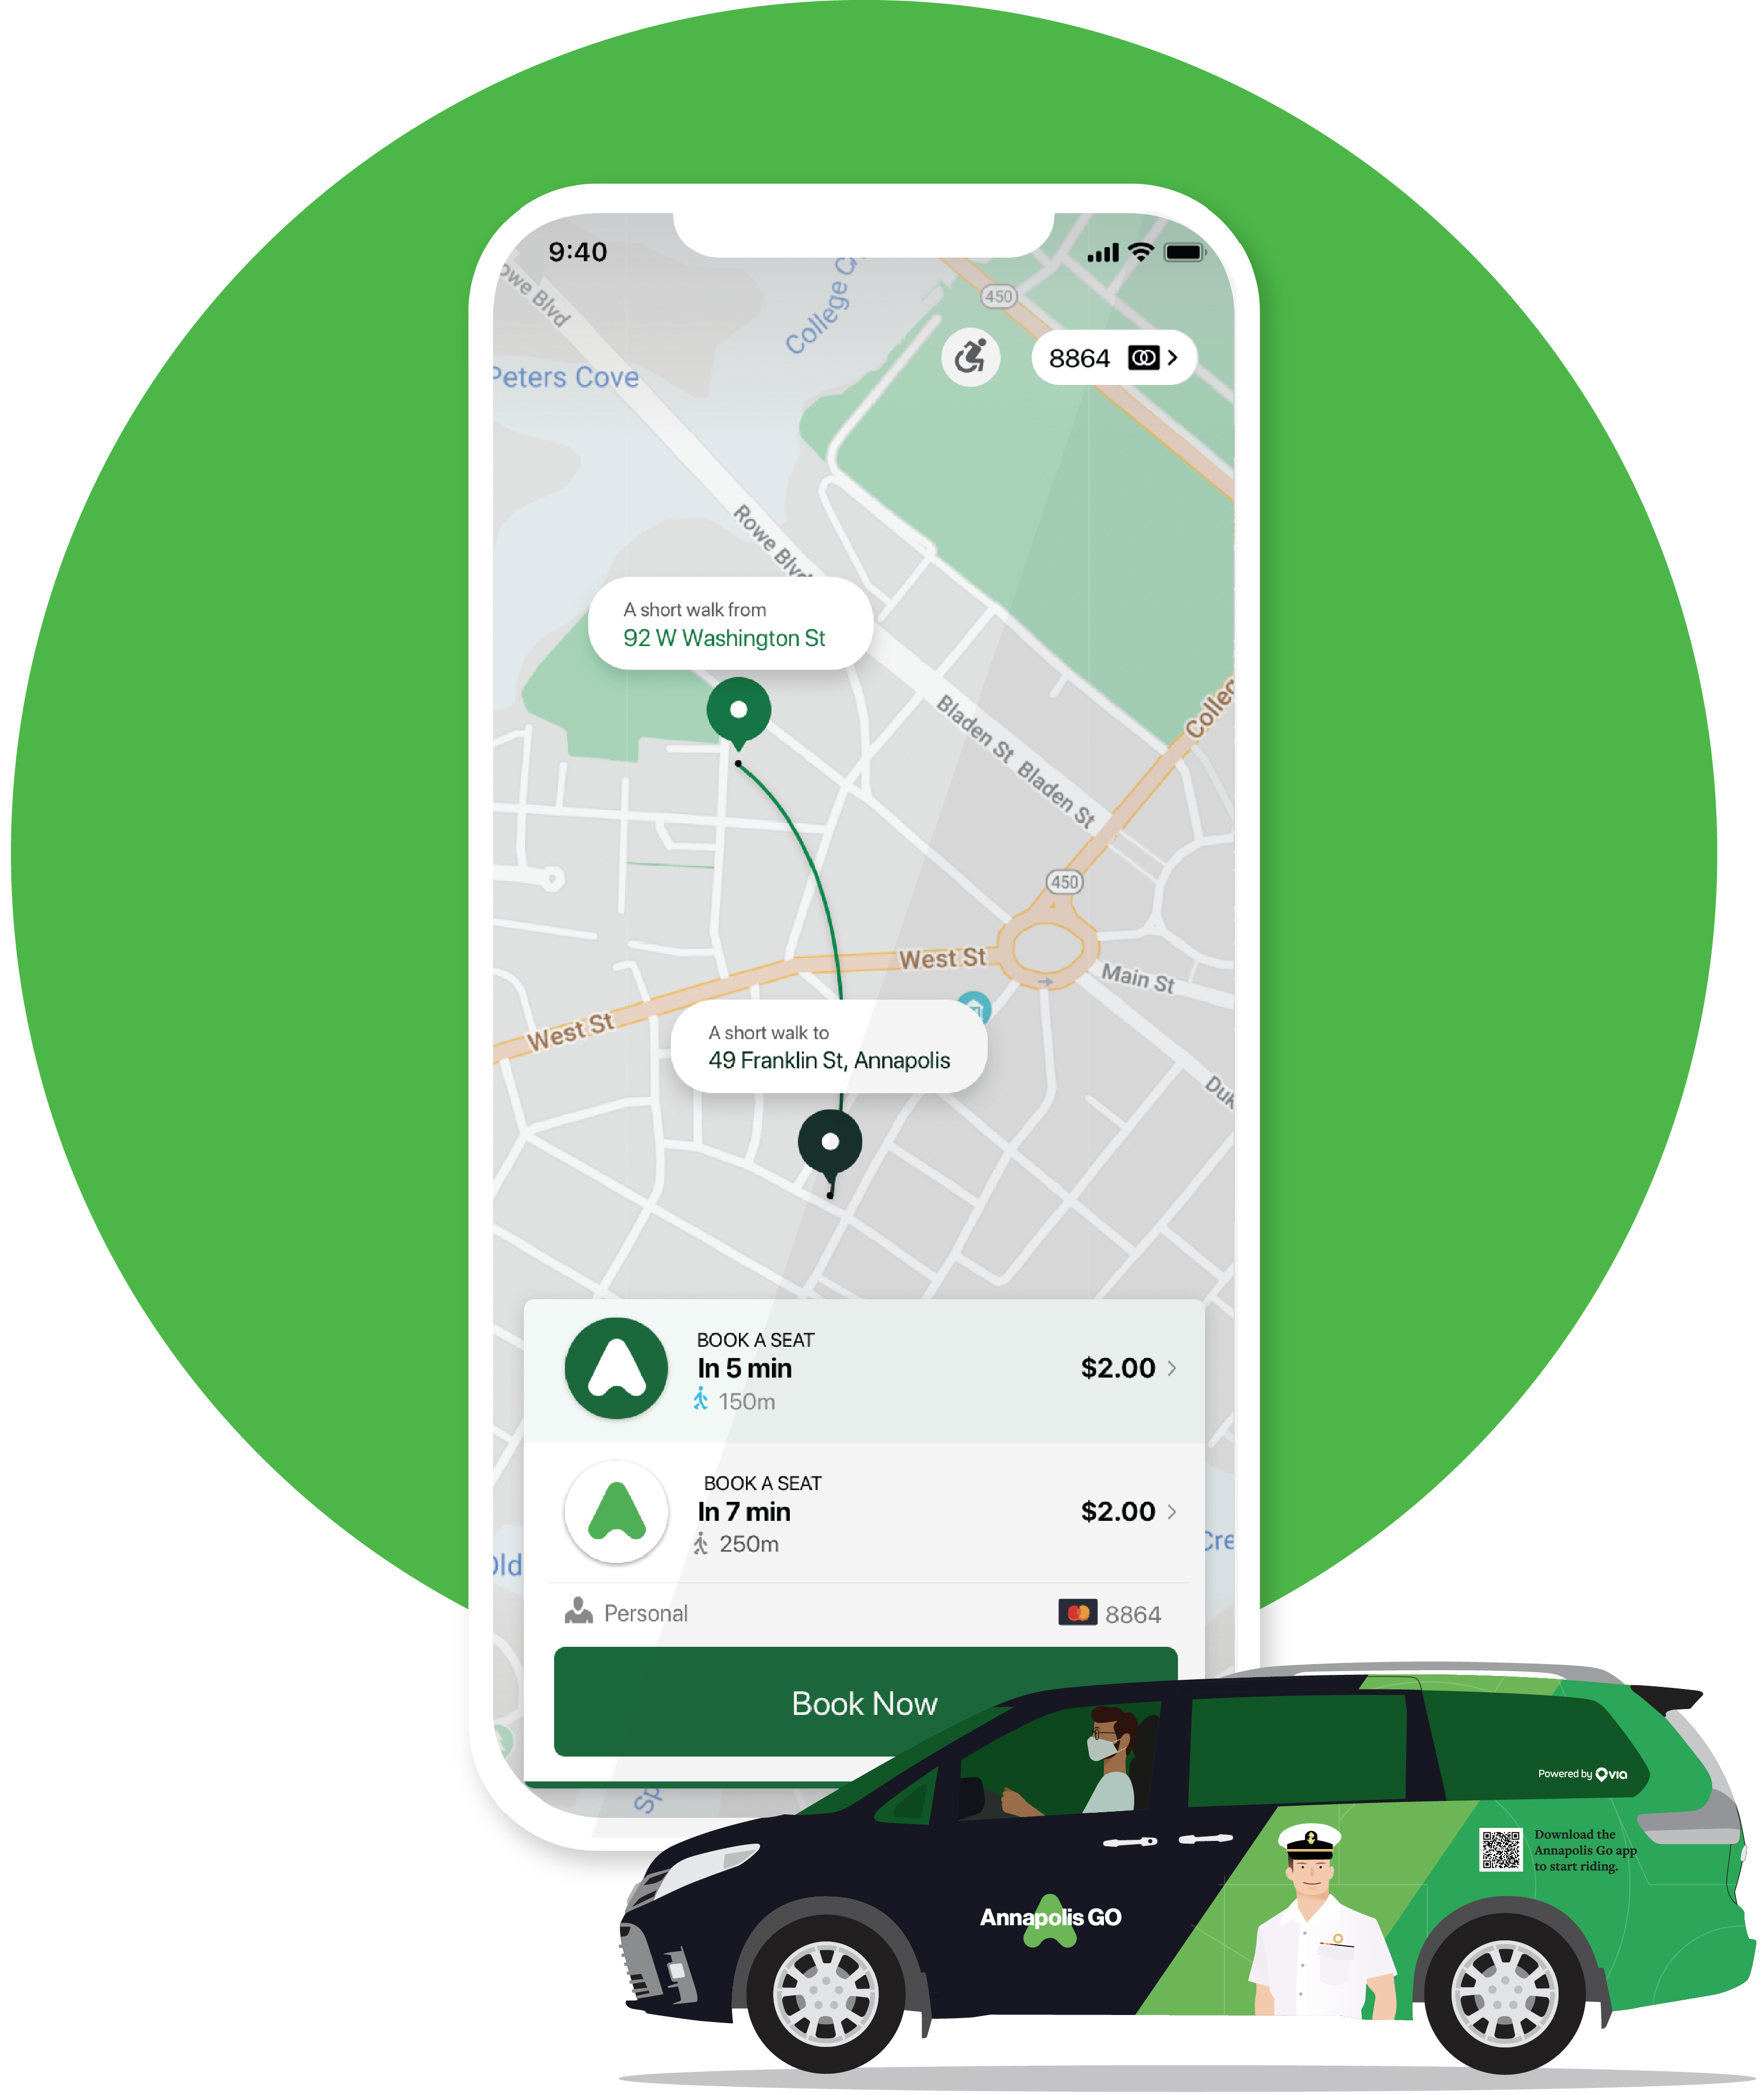 Annapolis GO On-Demand Rideshare Service New Affordable Public Transit System in Maryland